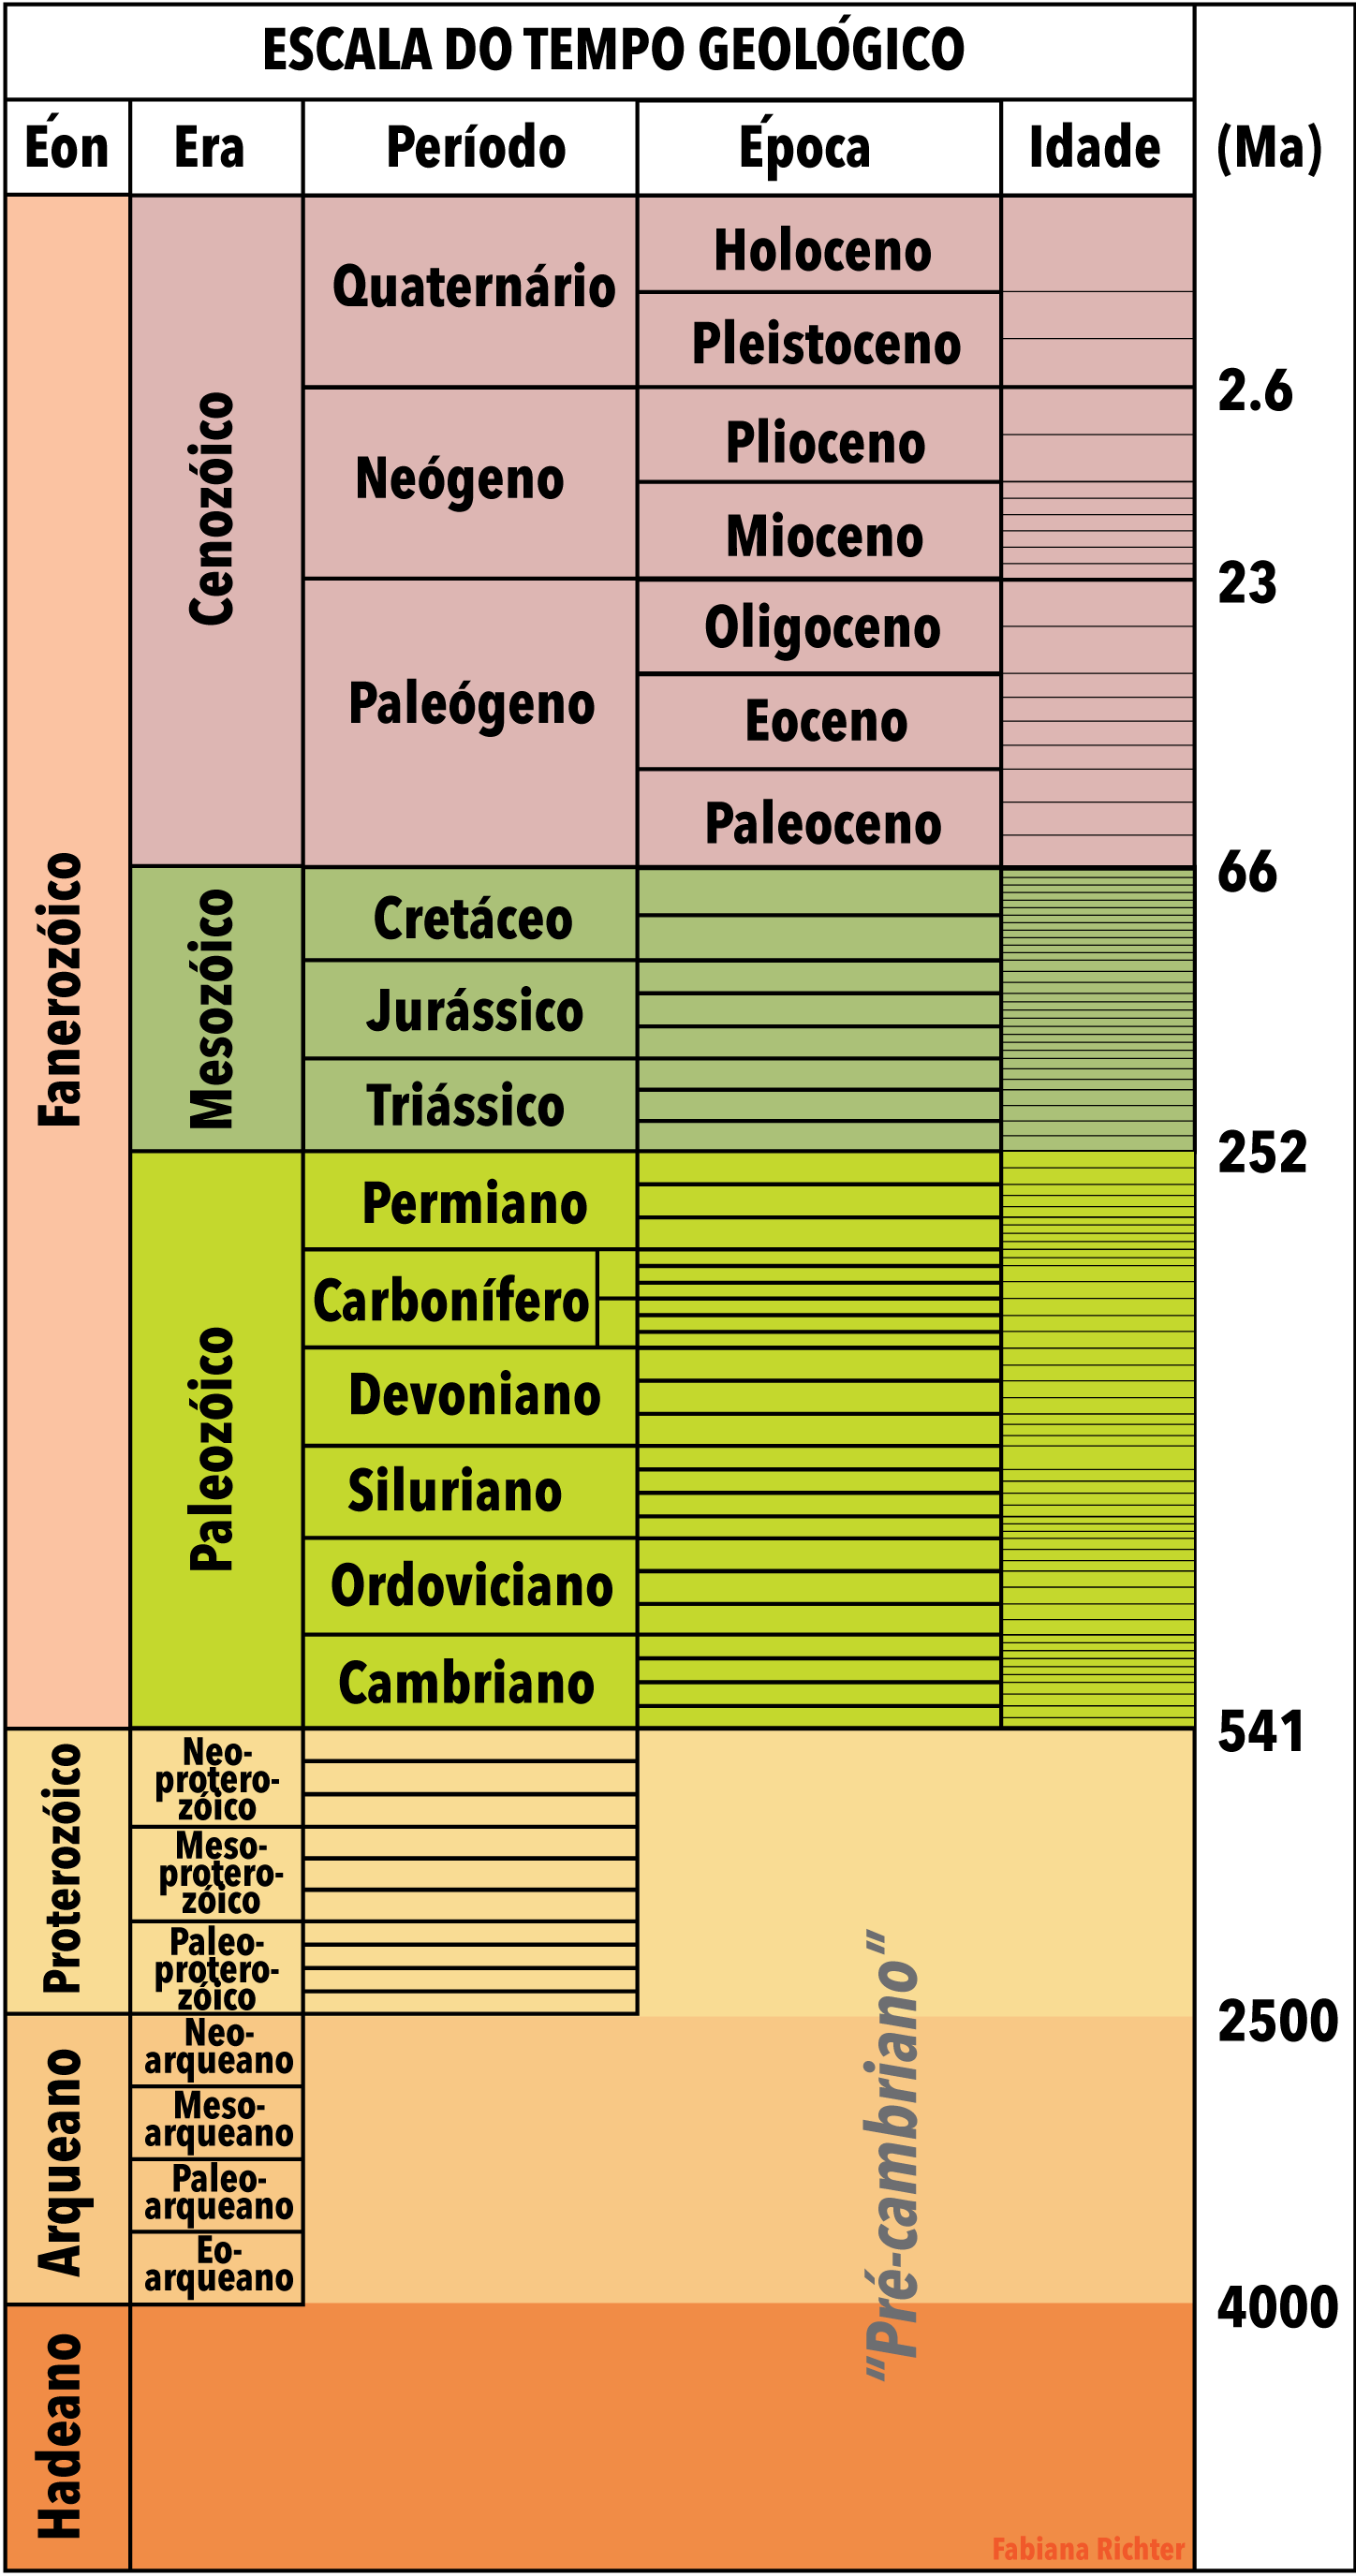 Simplified geologic timescale, showing the eons, eras, and the divisions of periods, epochs, and ages